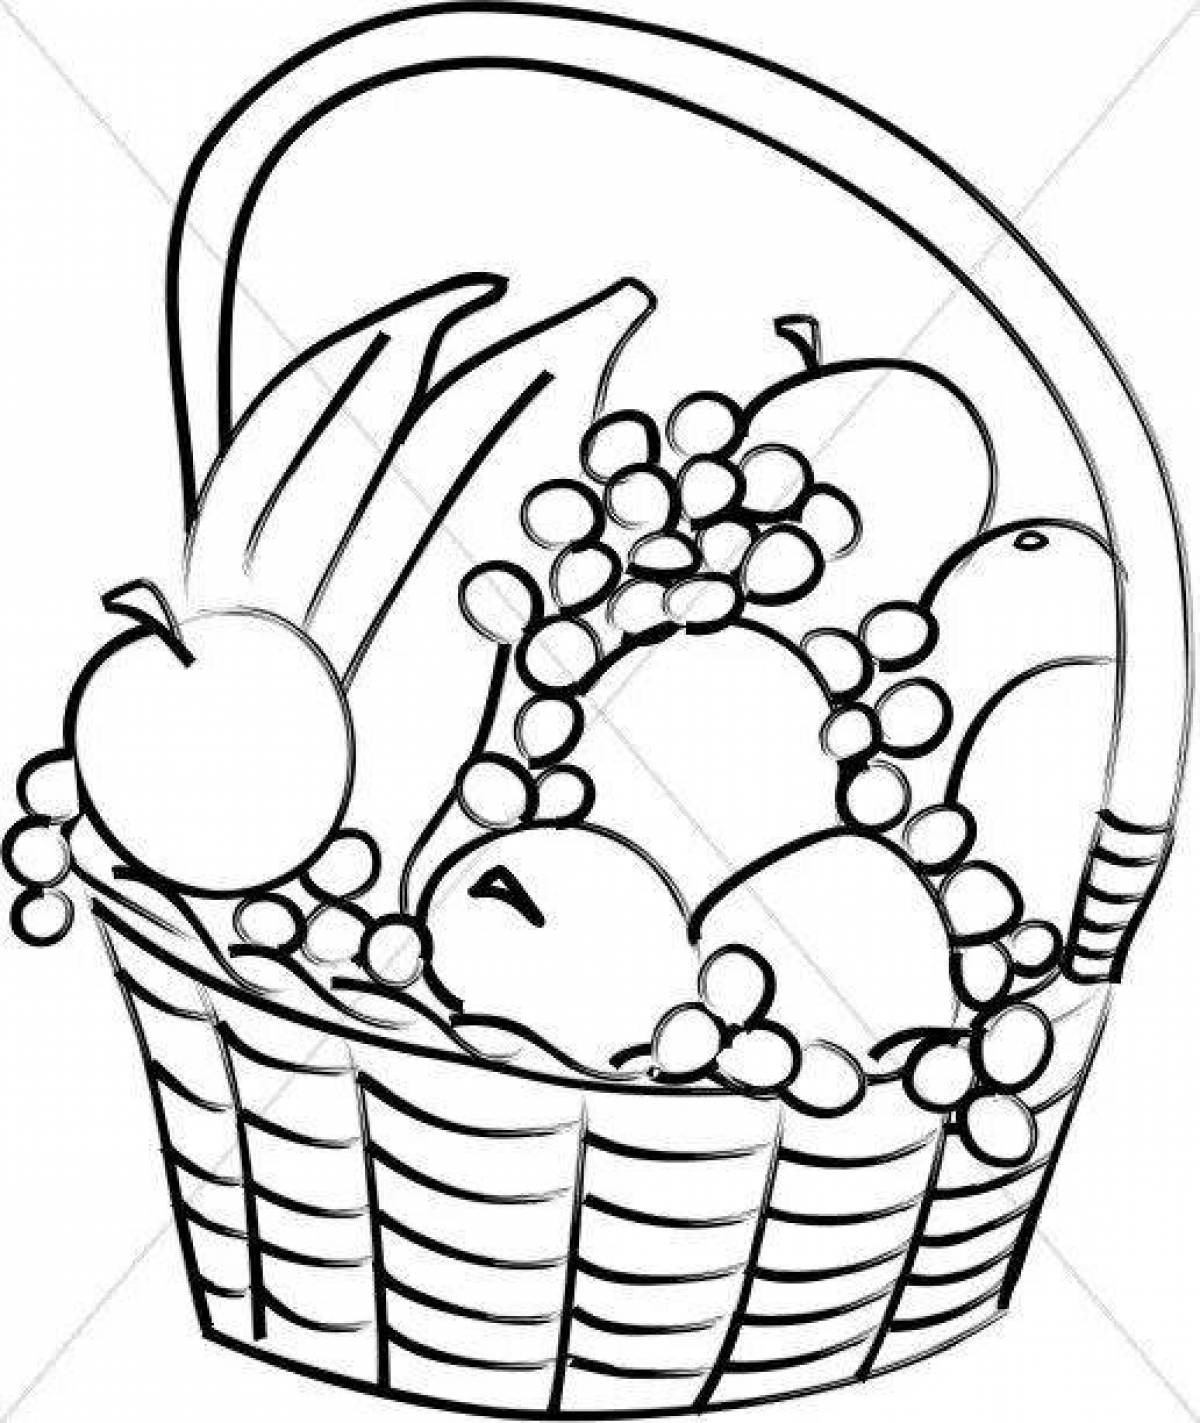 Coloring book grocery shining basket